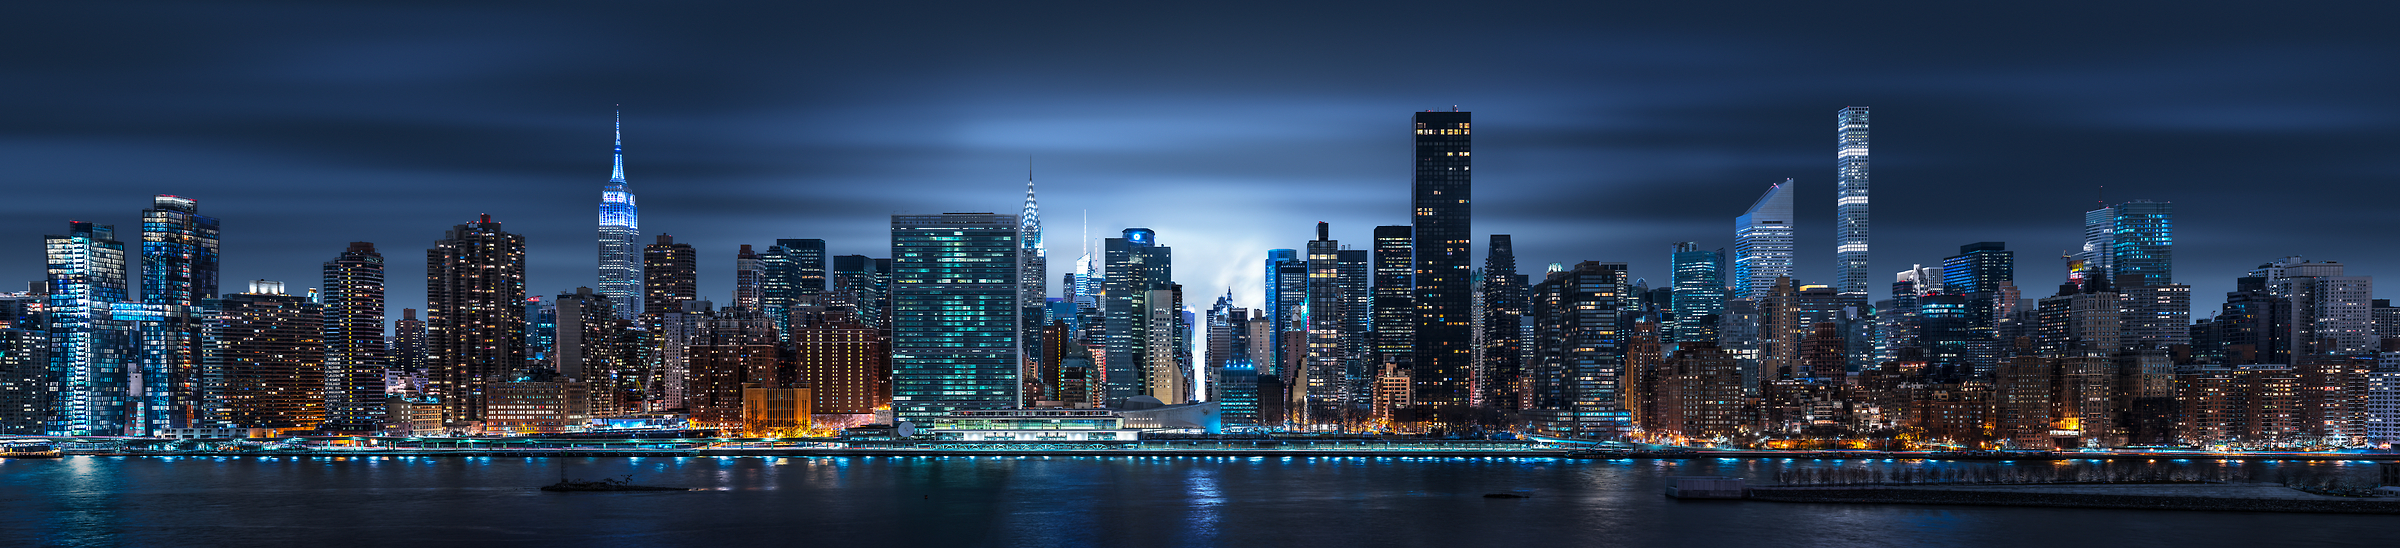 6,410 megapixels! A very high resolution, large-format VAST photo print of the NYC skyline at night with the East River; cityscape photo created by Dan Piech